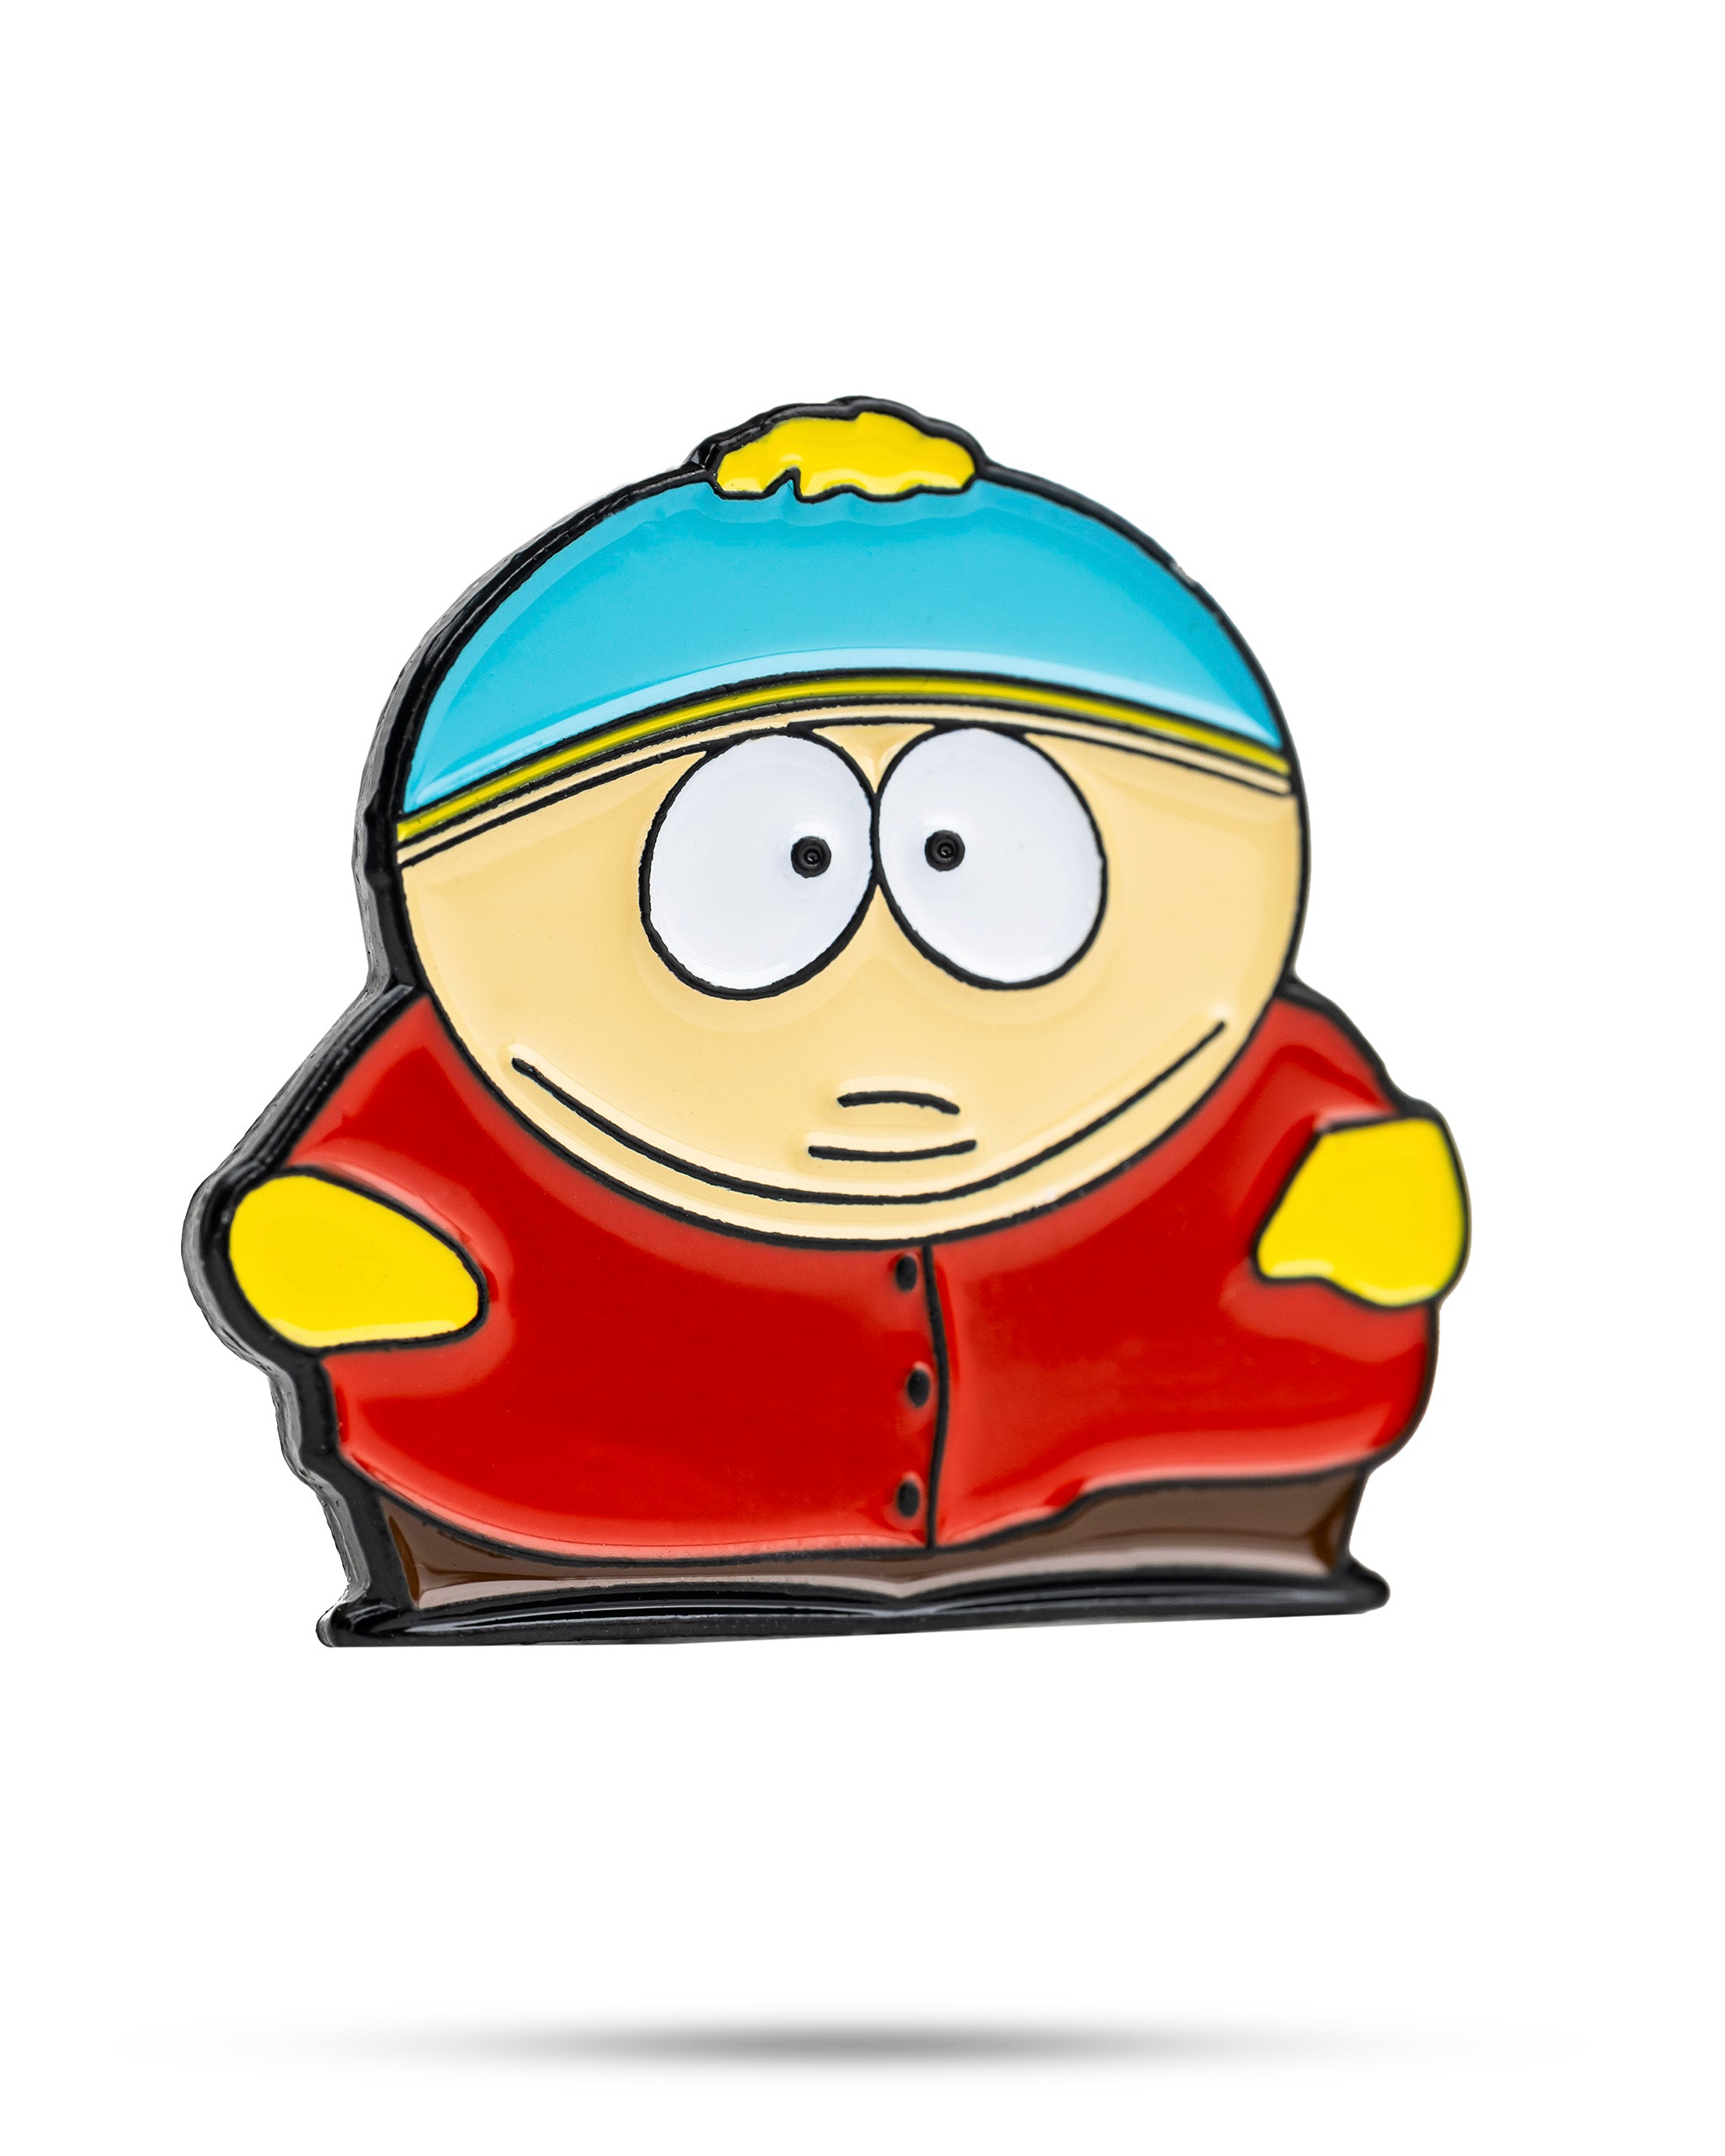 docter pepper recommends pics of cartman from south park pic